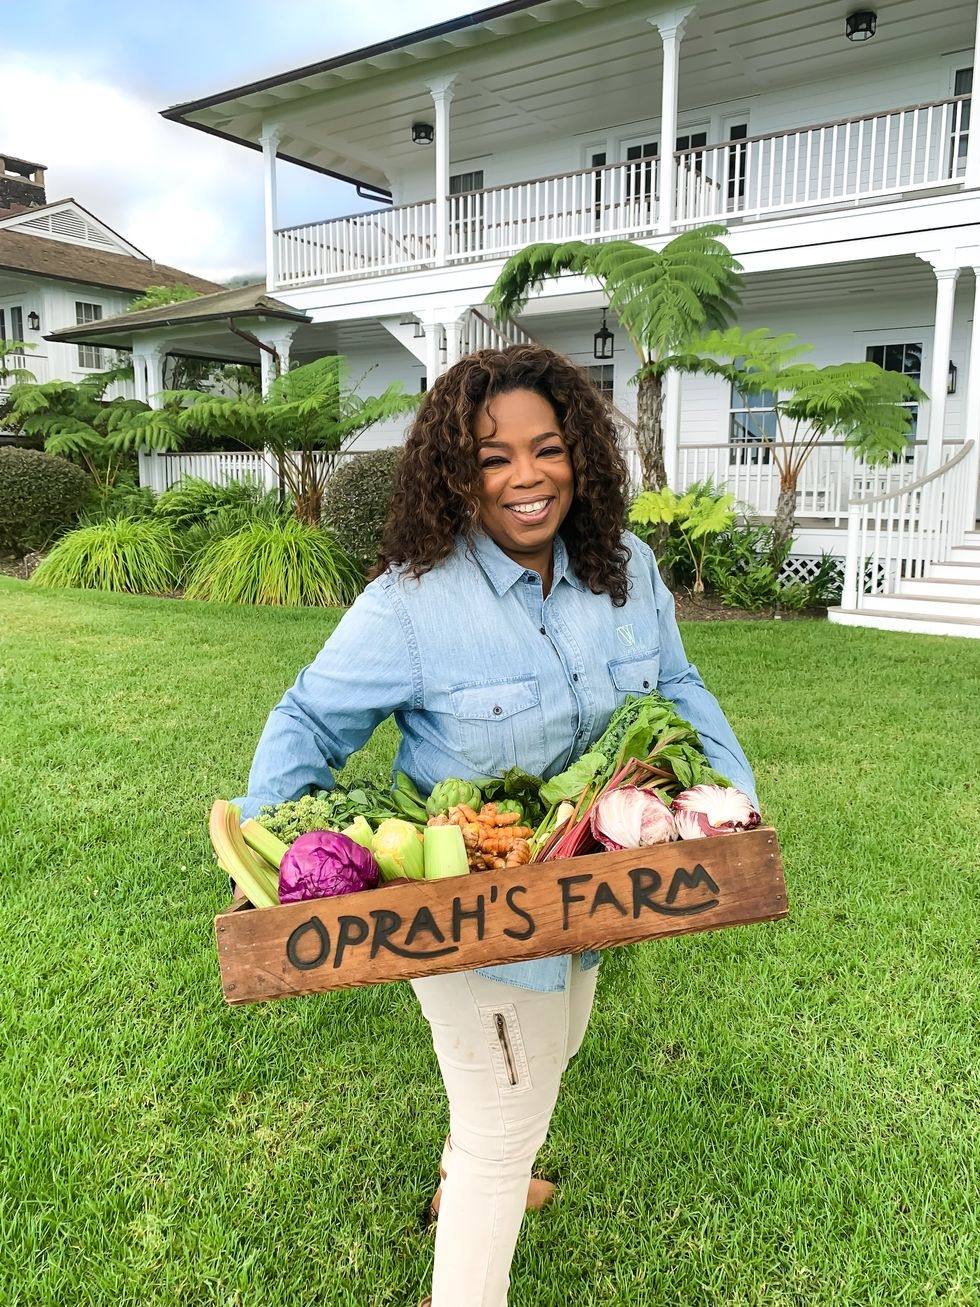 This Just Picked: Oprah Shows Us the Latest Bounty From Her Garden